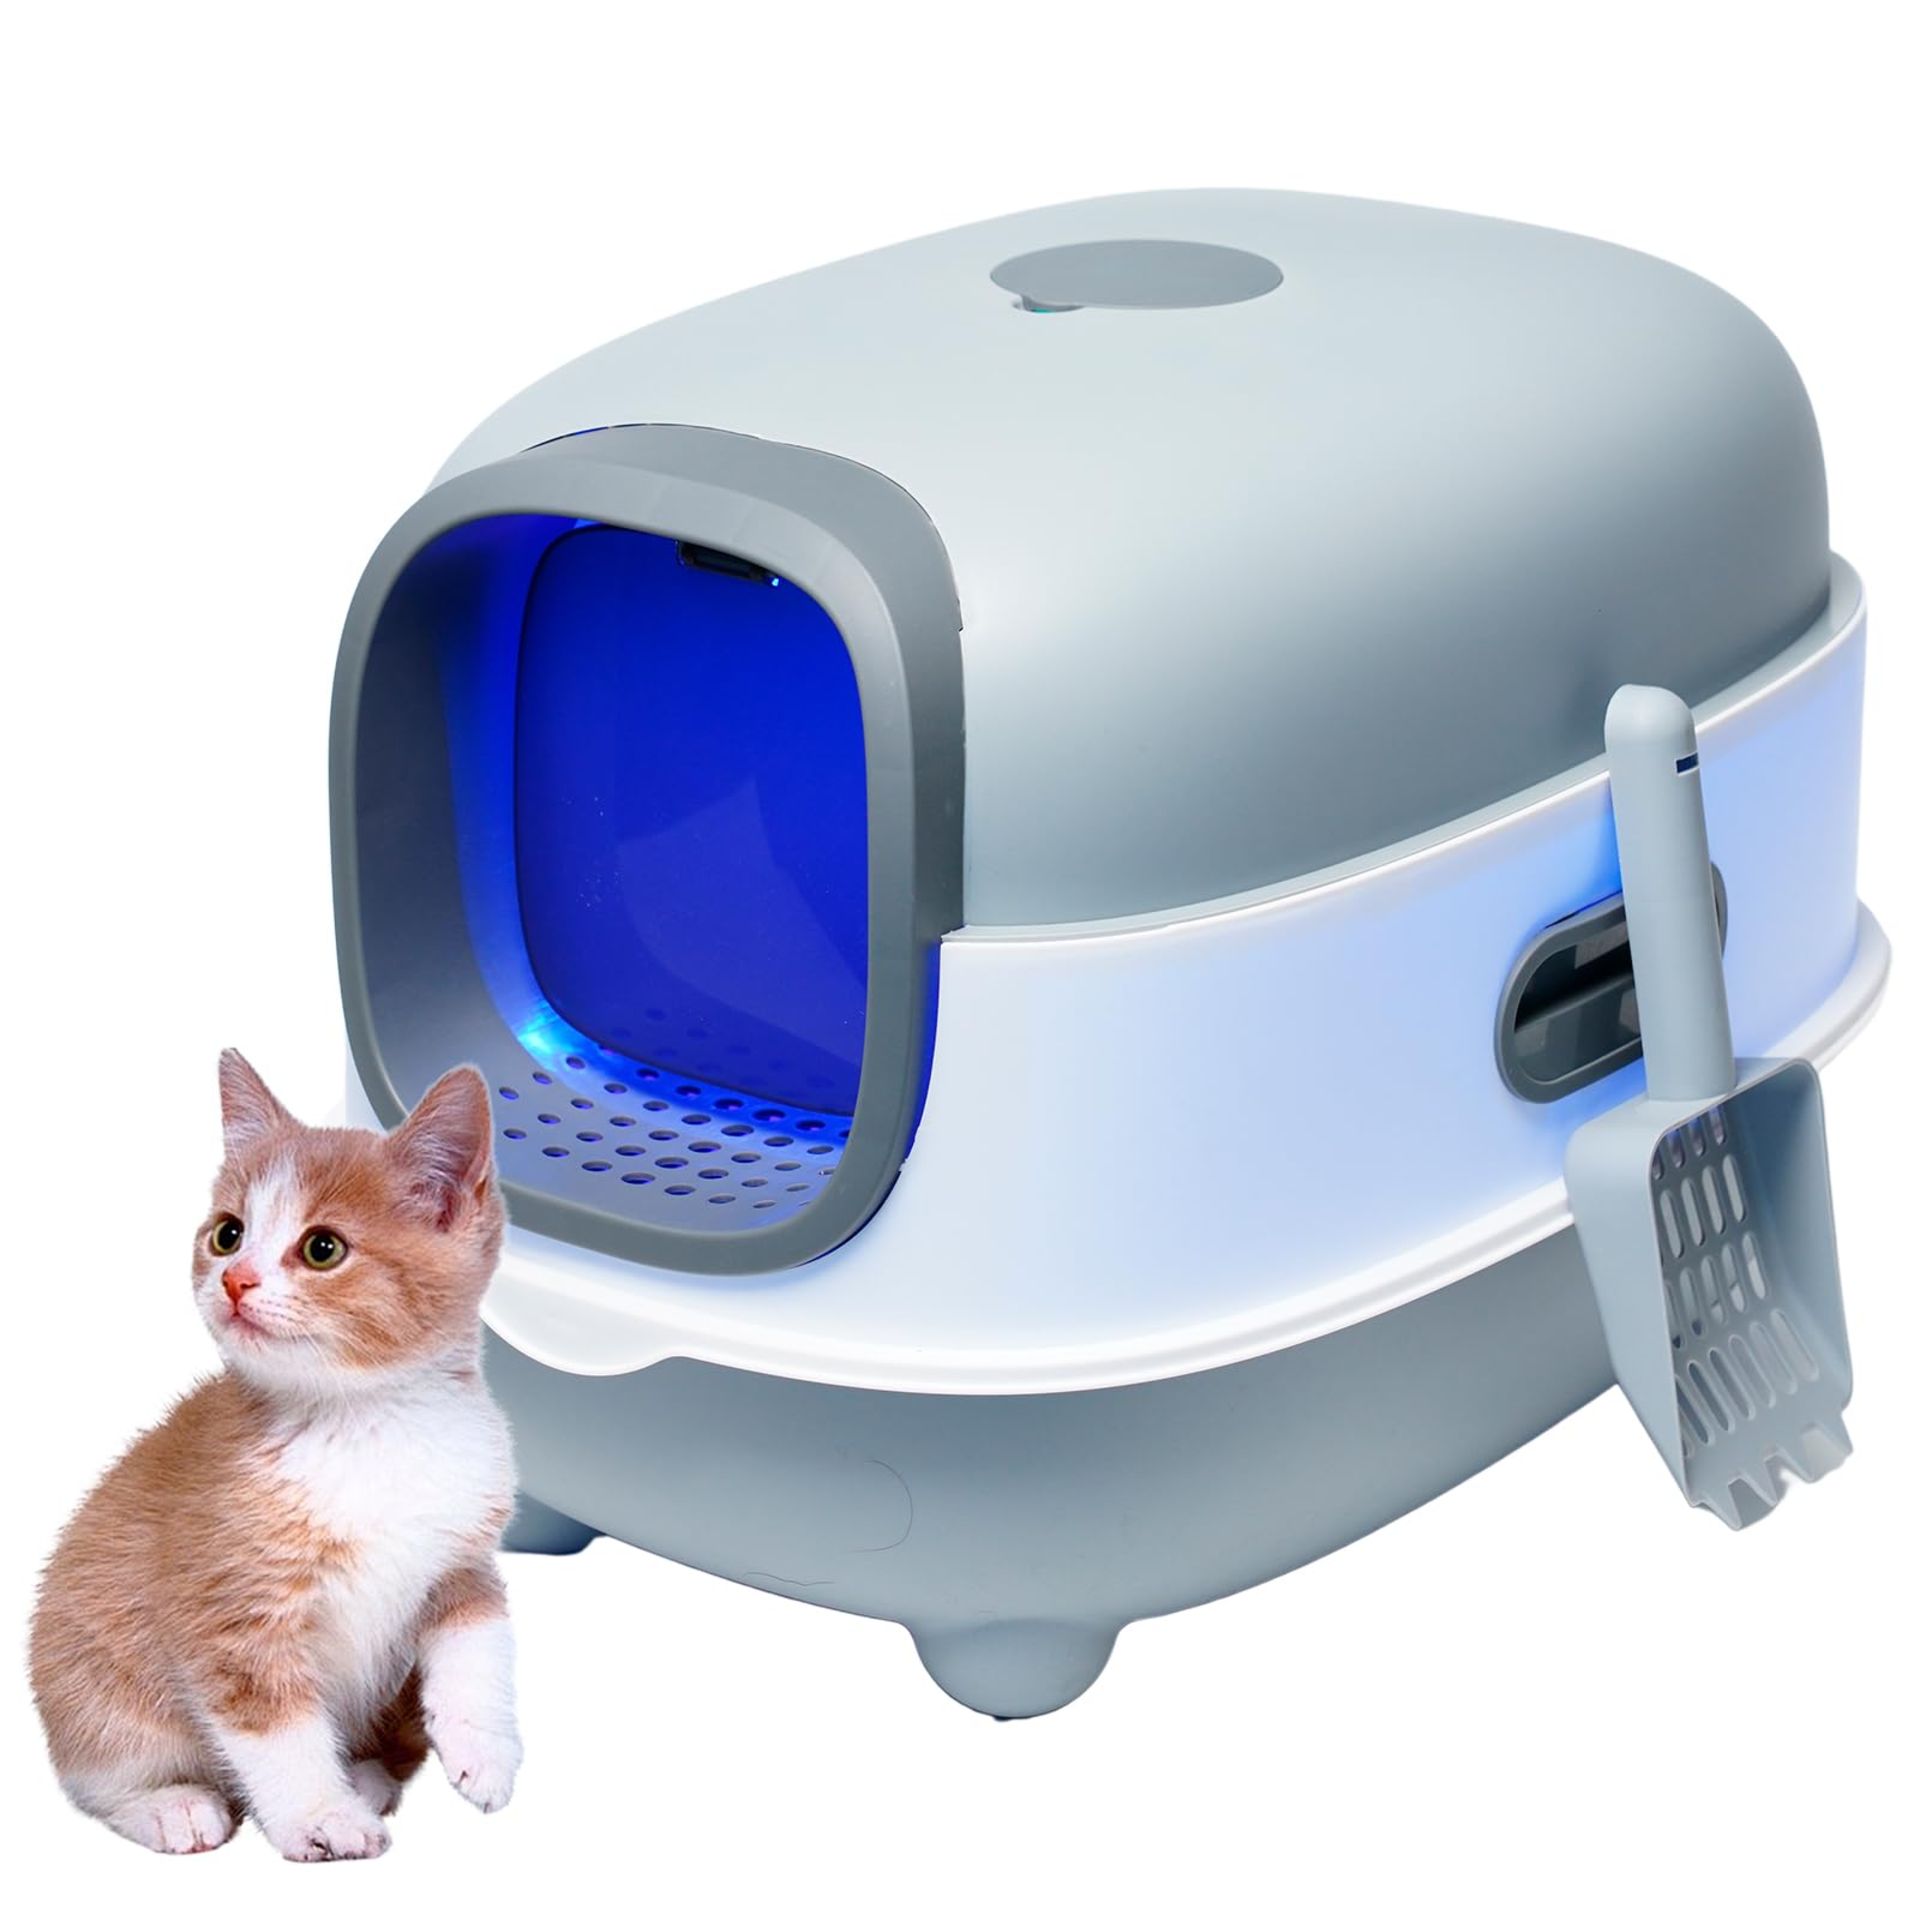 RRP £42.22 Eapura Cat Litter Box with Lid and Scoop UV Sterilization and Deodorization